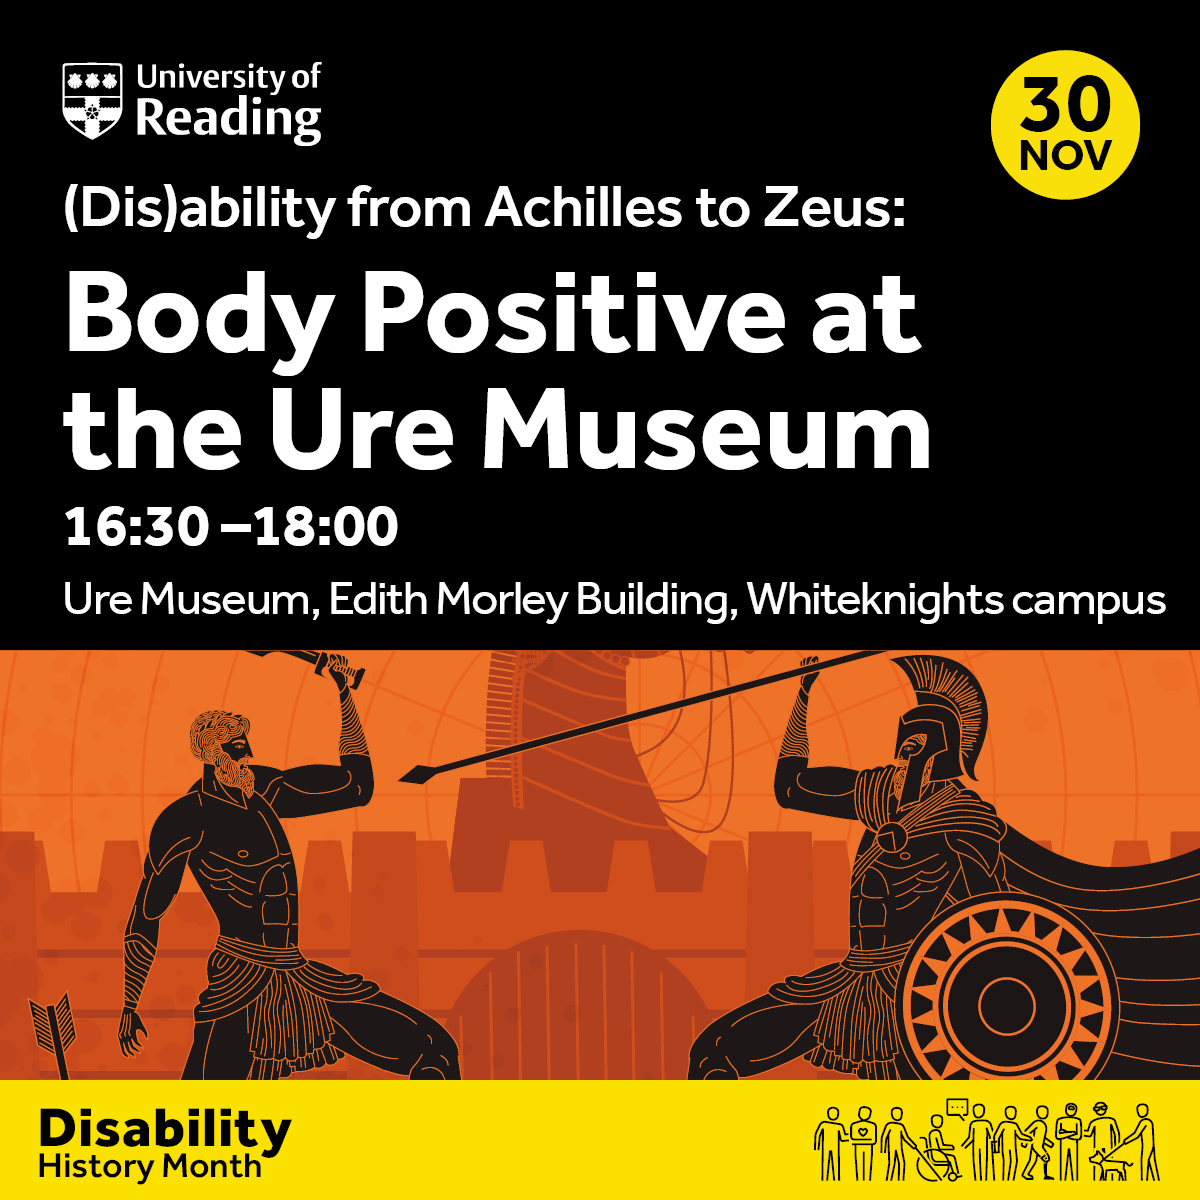 We have a great event for #DisabilityHistoryMonth tomorrow: an exploration of body positivity in the ancient world with members of our volunteer research team from @ReadingMencap 

Our pots and our team have a story to tell, come along and hear their voices! 

#DisabilityHistory